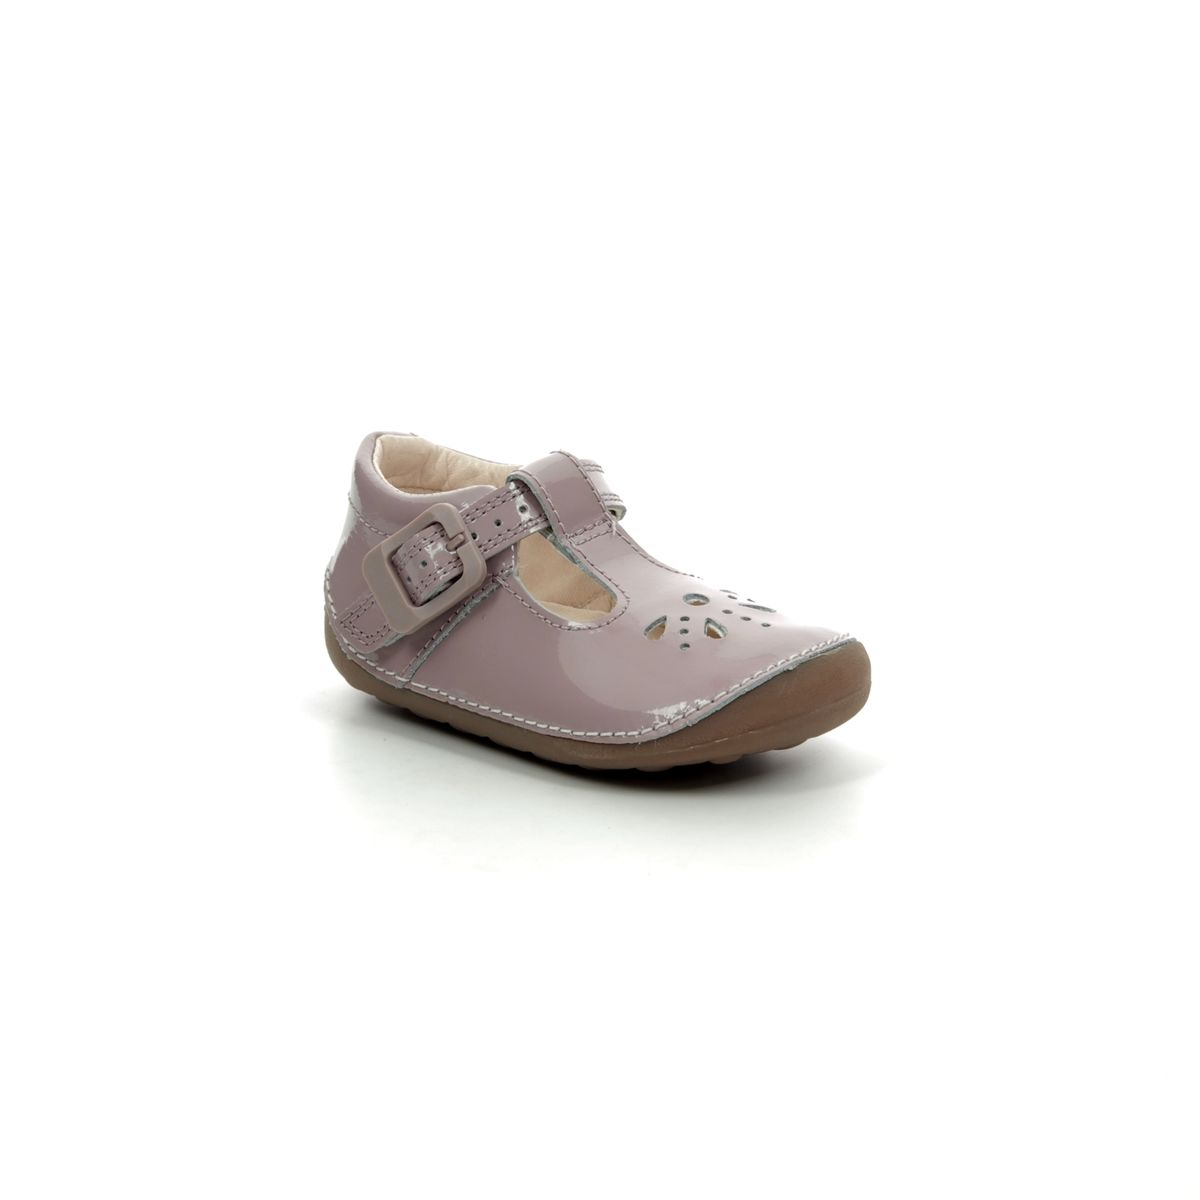 clarks childrens party shoes